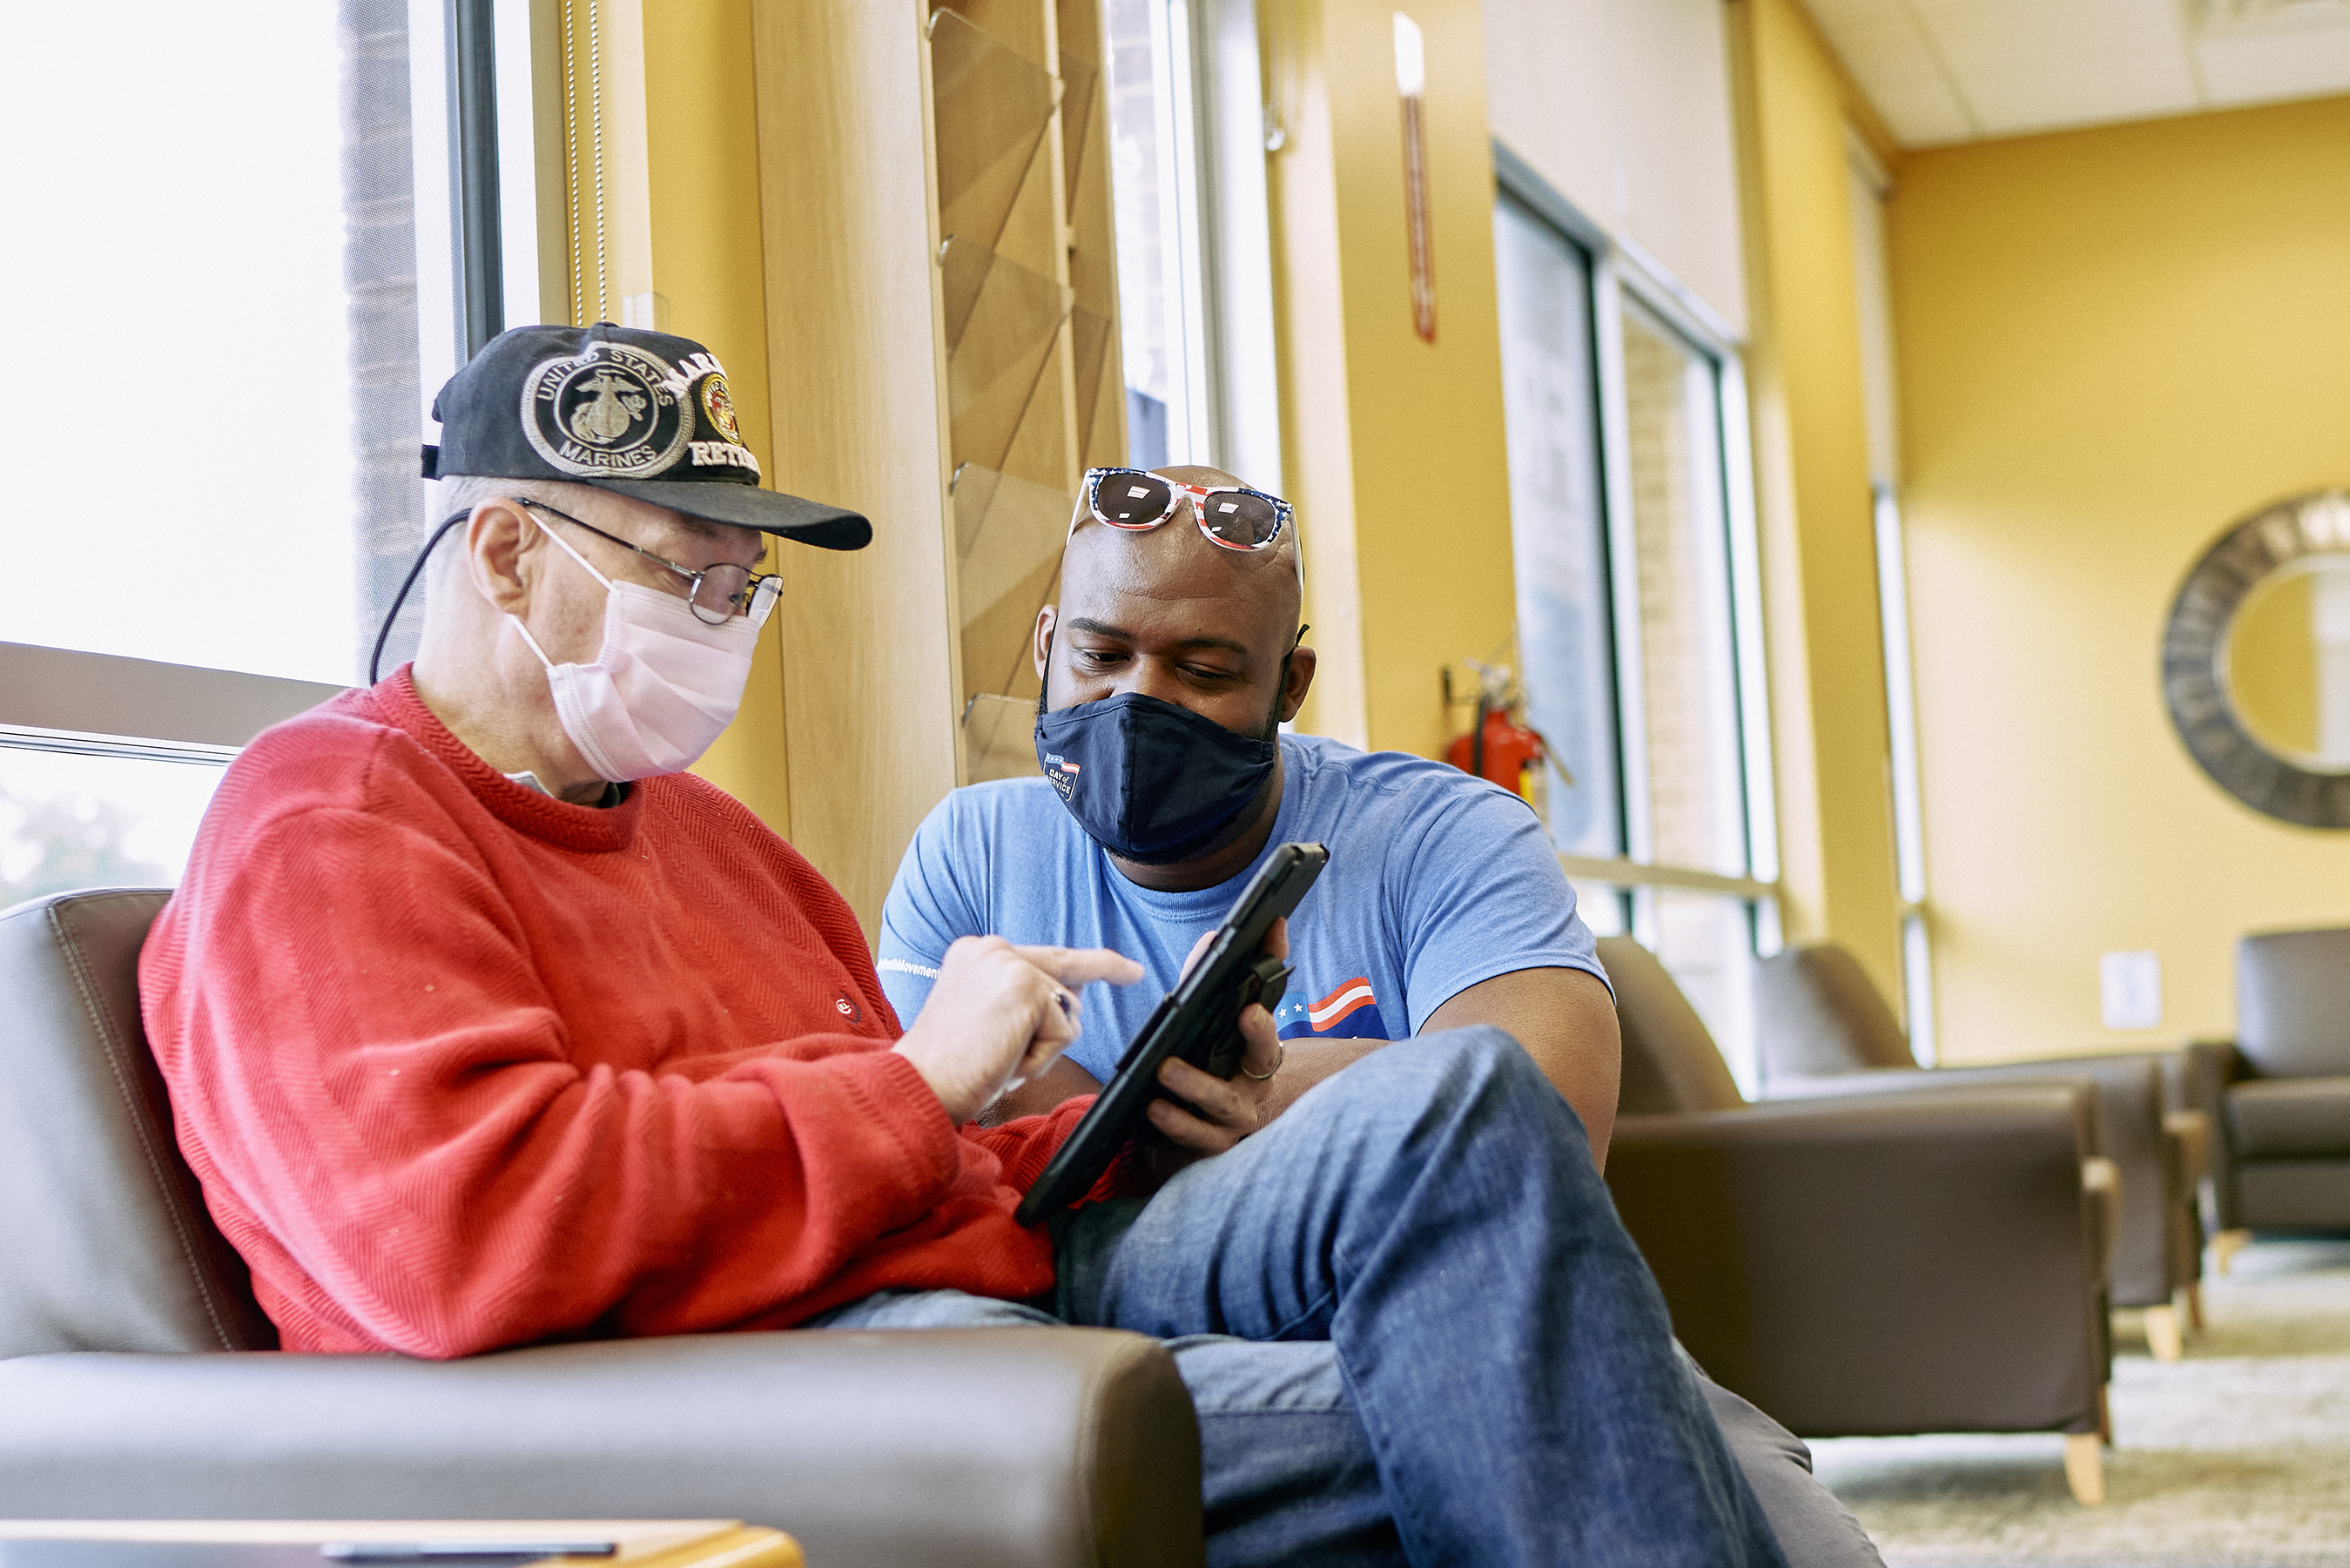 The Aspen Dental team provides free care to veterans and their families during the Aspen Dental 7th Annual Day of Service, on Saturday, Nov. 6, 2021, in Loganville, Ga. (Ben Rollins/AP Images for Aspen Dental)